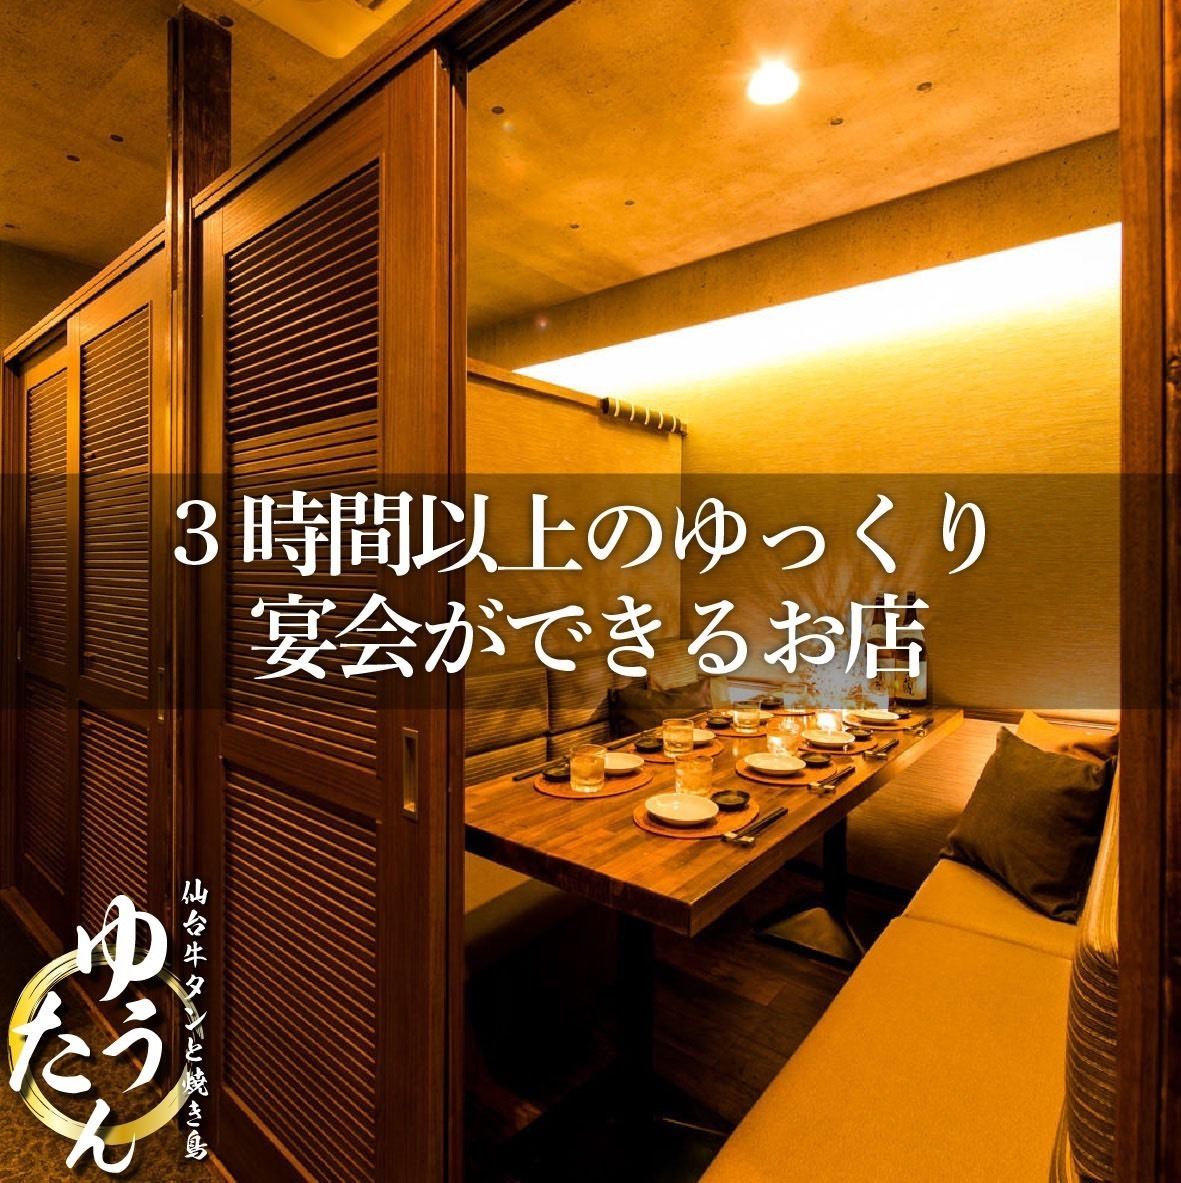 We offer 3-hour all-you-can-drink courses starting from 3,000 yen. Perfect for any type of party.